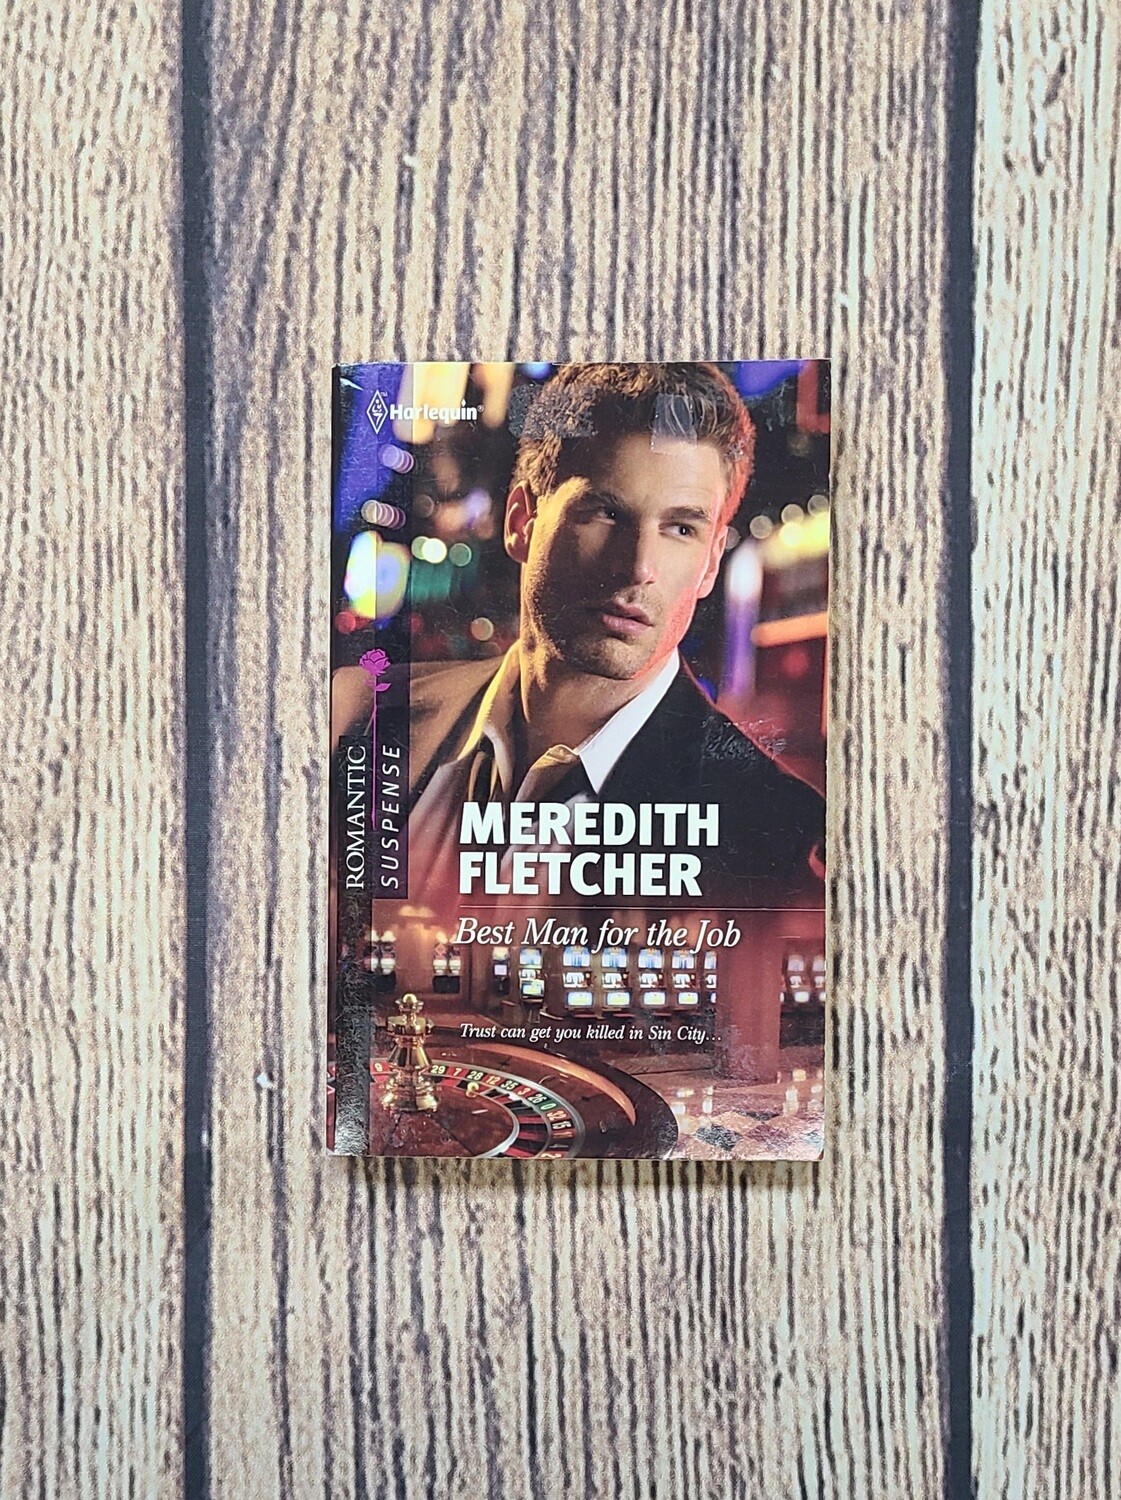 Best Man for the Job by Meredith Fletcher